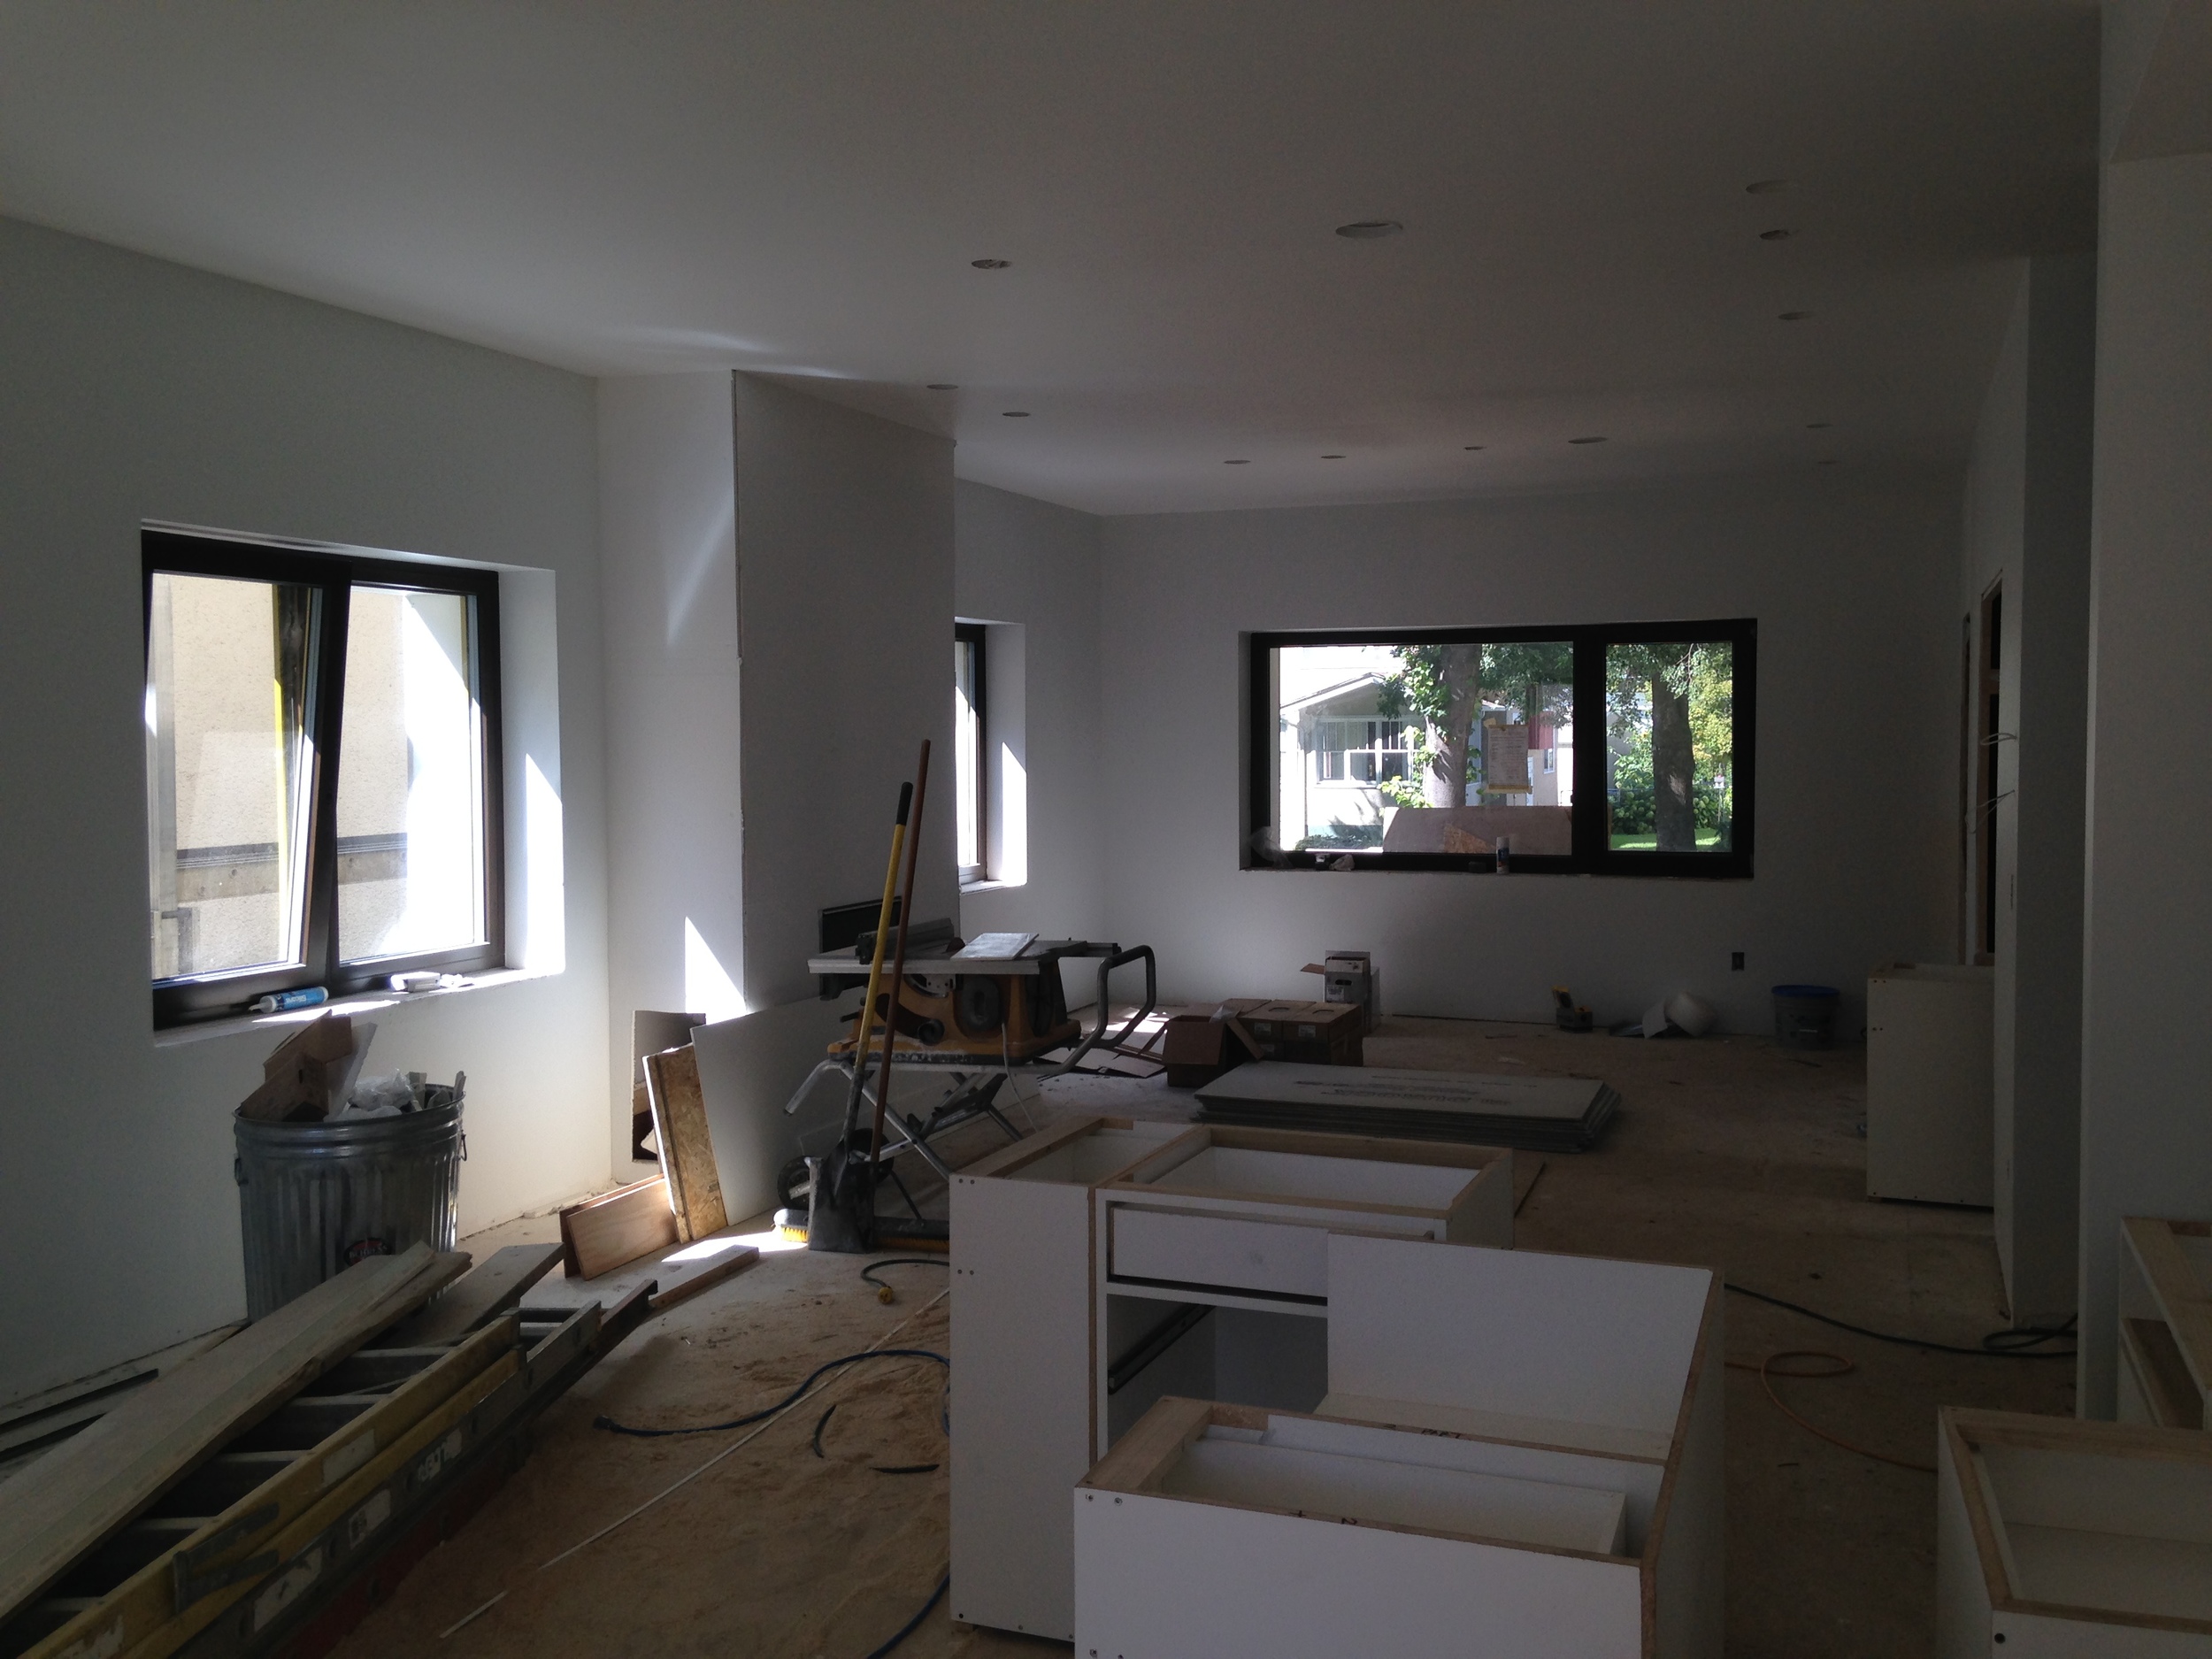  Looking toward the dining and living areas of main room with fireplace 